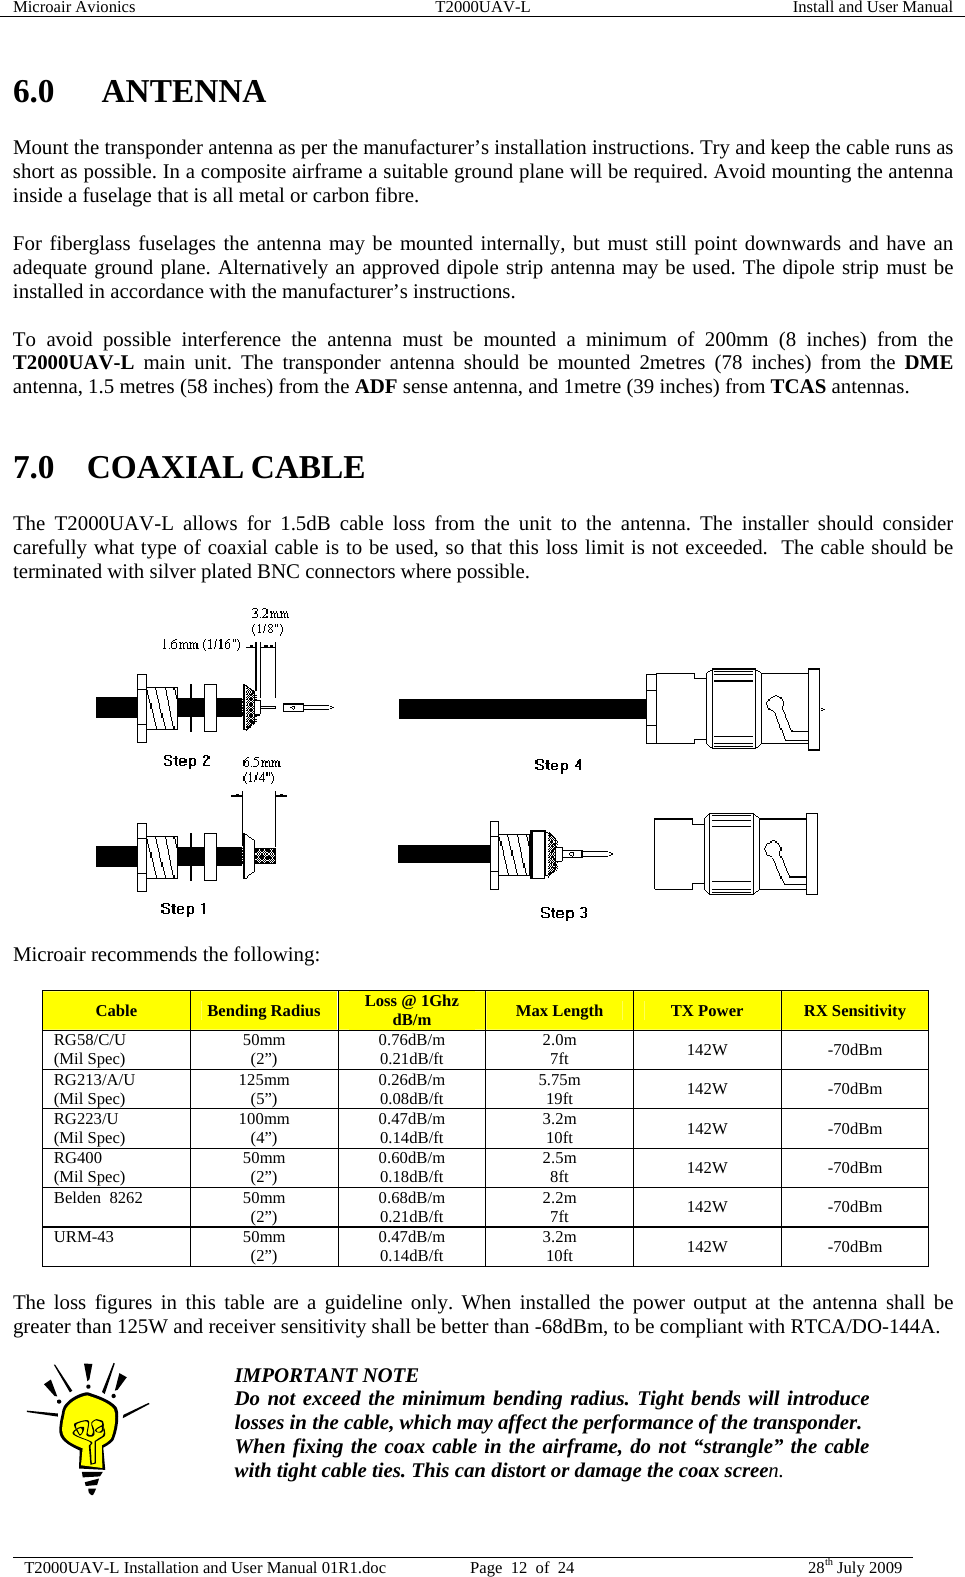 Microair Avionics  T2000UAV-L  Install and User Manual  T2000UAV-L Installation and User Manual 01R1.doc  Page  12  of  24  28th July 2009  6.0 ANTENNA Mount the transponder antenna as per the manufacturer’s installation instructions. Try and keep the cable runs as short as possible. In a composite airframe a suitable ground plane will be required. Avoid mounting the antenna inside a fuselage that is all metal or carbon fibre.  For fiberglass fuselages the antenna may be mounted internally, but must still point downwards and have an adequate ground plane. Alternatively an approved dipole strip antenna may be used. The dipole strip must be installed in accordance with the manufacturer’s instructions.  To avoid possible interference the antenna must be mounted a minimum of 200mm (8 inches) from the T2000UAV-L main unit. The transponder antenna should be mounted 2metres (78 inches) from the DME antenna, 1.5 metres (58 inches) from the ADF sense antenna, and 1metre (39 inches) from TCAS antennas.  7.0 COAXIAL CABLE The T2000UAV-L allows for 1.5dB cable loss from the unit to the antenna. The installer should consider carefully what type of coaxial cable is to be used, so that this loss limit is not exceeded.  The cable should be terminated with silver plated BNC connectors where possible.                Microair recommends the following:  Cable  Bending Radius  Loss @ 1Ghz dB/m  Max Length  TX Power  RX Sensitivity RG58/C/U (Mil Spec)  50mm (2”)  0.76dB/m 0.21dB/ft  2.0m 7ft  142W -70dBm RG213/A/U (Mil Spec)  125mm (5”)  0.26dB/m 0.08dB/ft  5.75m 19ft  142W -70dBm RG223/U (Mil Spec)  100mm (4”)  0.47dB/m 0.14dB/ft  3.2m 10ft  142W -70dBm RG400 (Mil Spec)  50mm (2”)  0.60dB/m 0.18dB/ft  2.5m 8ft  142W -70dBm Belden  8262  50mm (2”)  0.68dB/m 0.21dB/ft  2.2m 7ft  142W -70dBm URM-43 50mm (2”)  0.47dB/m 0.14dB/ft  3.2m 10ft  142W -70dBm  The loss figures in this table are a guideline only. When installed the power output at the antenna shall be greater than 125W and receiver sensitivity shall be better than -68dBm, to be compliant with RTCA/DO-144A.   IMPORTANT NOTE Do not exceed the minimum bending radius. Tight bends will introduce losses in the cable, which may affect the performance of the transponder.  When fixing the coax cable in the airframe, do not “strangle” the cable with tight cable ties. This can distort or damage the coax screen.  